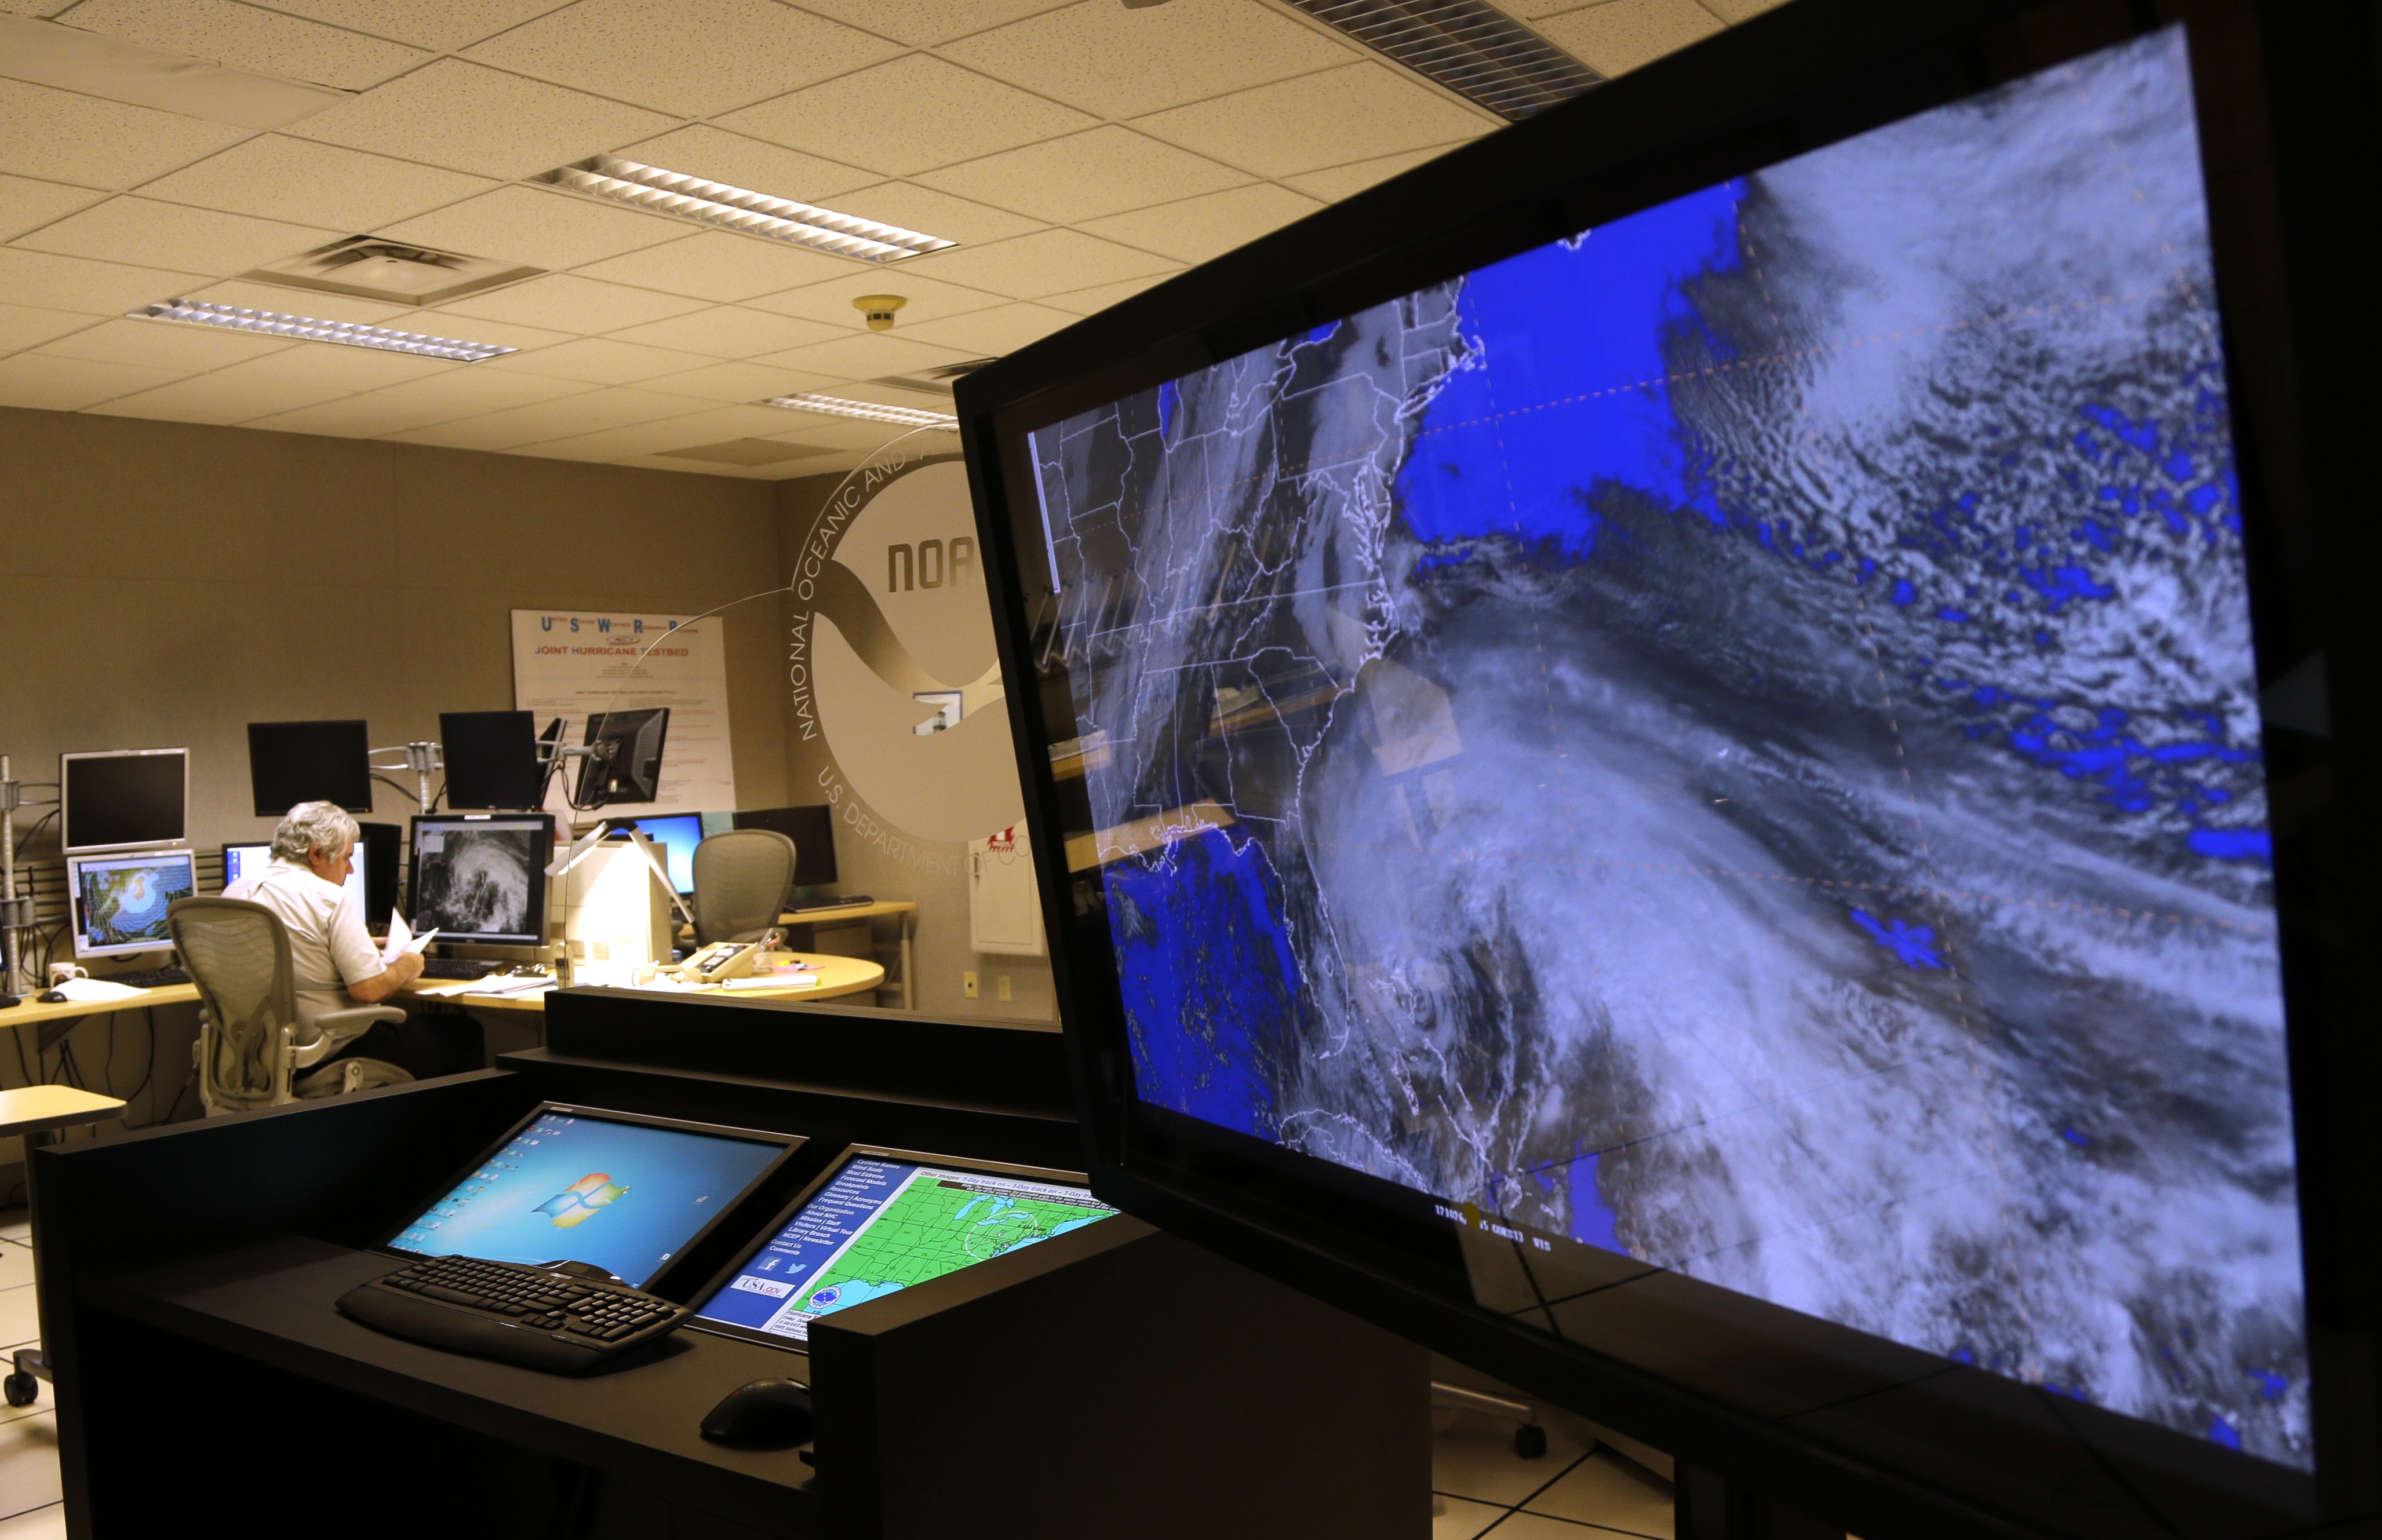 A satellite image of Hurricane Sandy is shown on a computer screen at the National Hurricane Center in Miami on Friday, Oct. 26, 2012. Sandy left 21 people dead as it moved through the Caribbean, following a path that could see it blend with a winter storm and reach the U.S. East Coast as a super-storm next week. (AP Photo/Lynne Sladky)